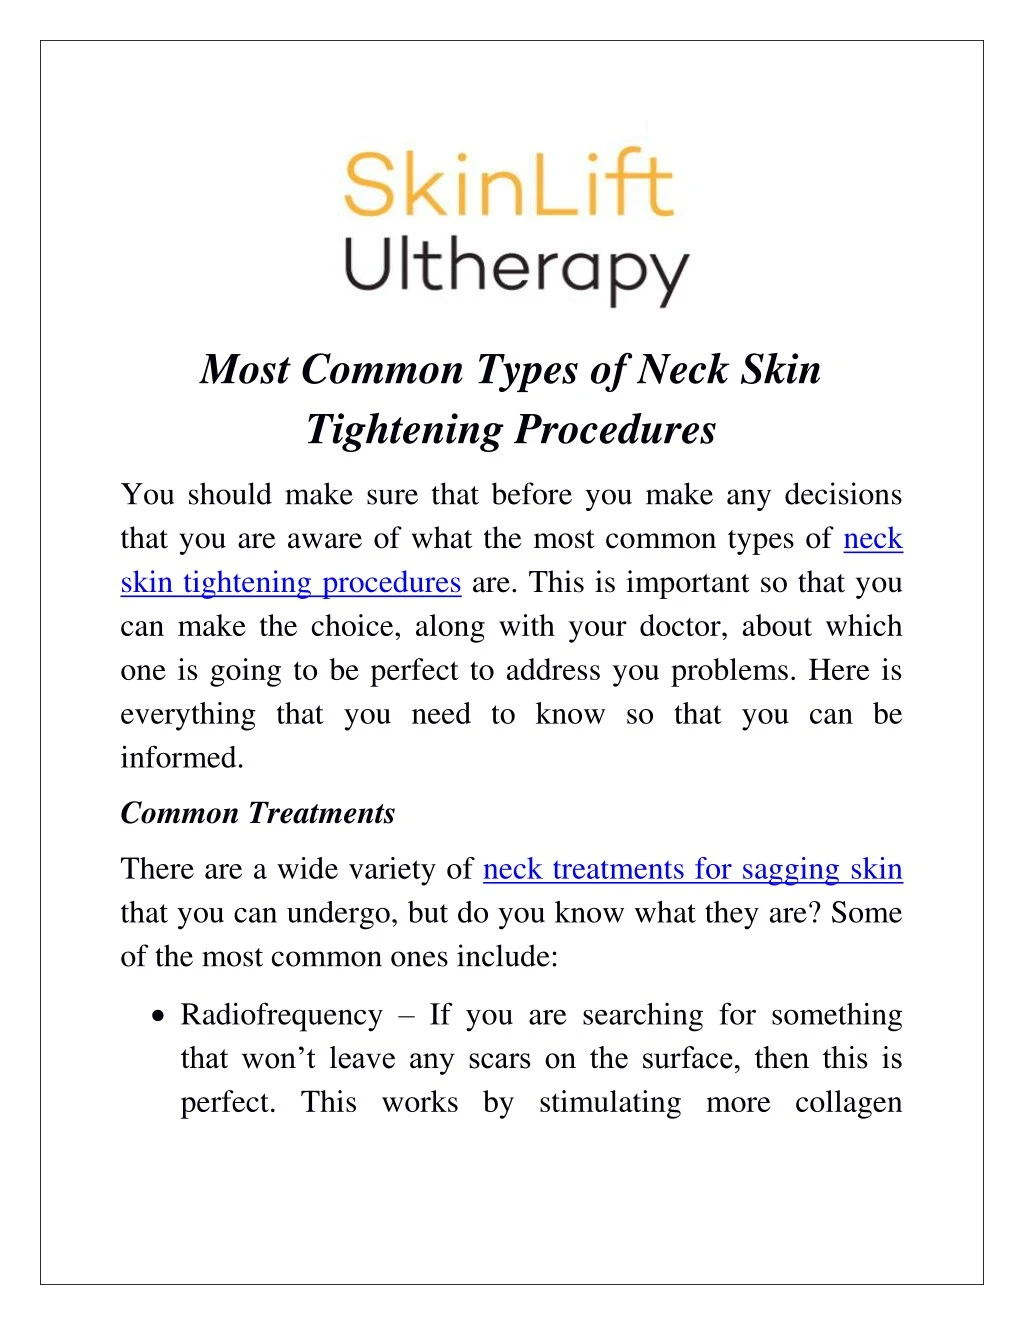 most common types of neck skin tightening